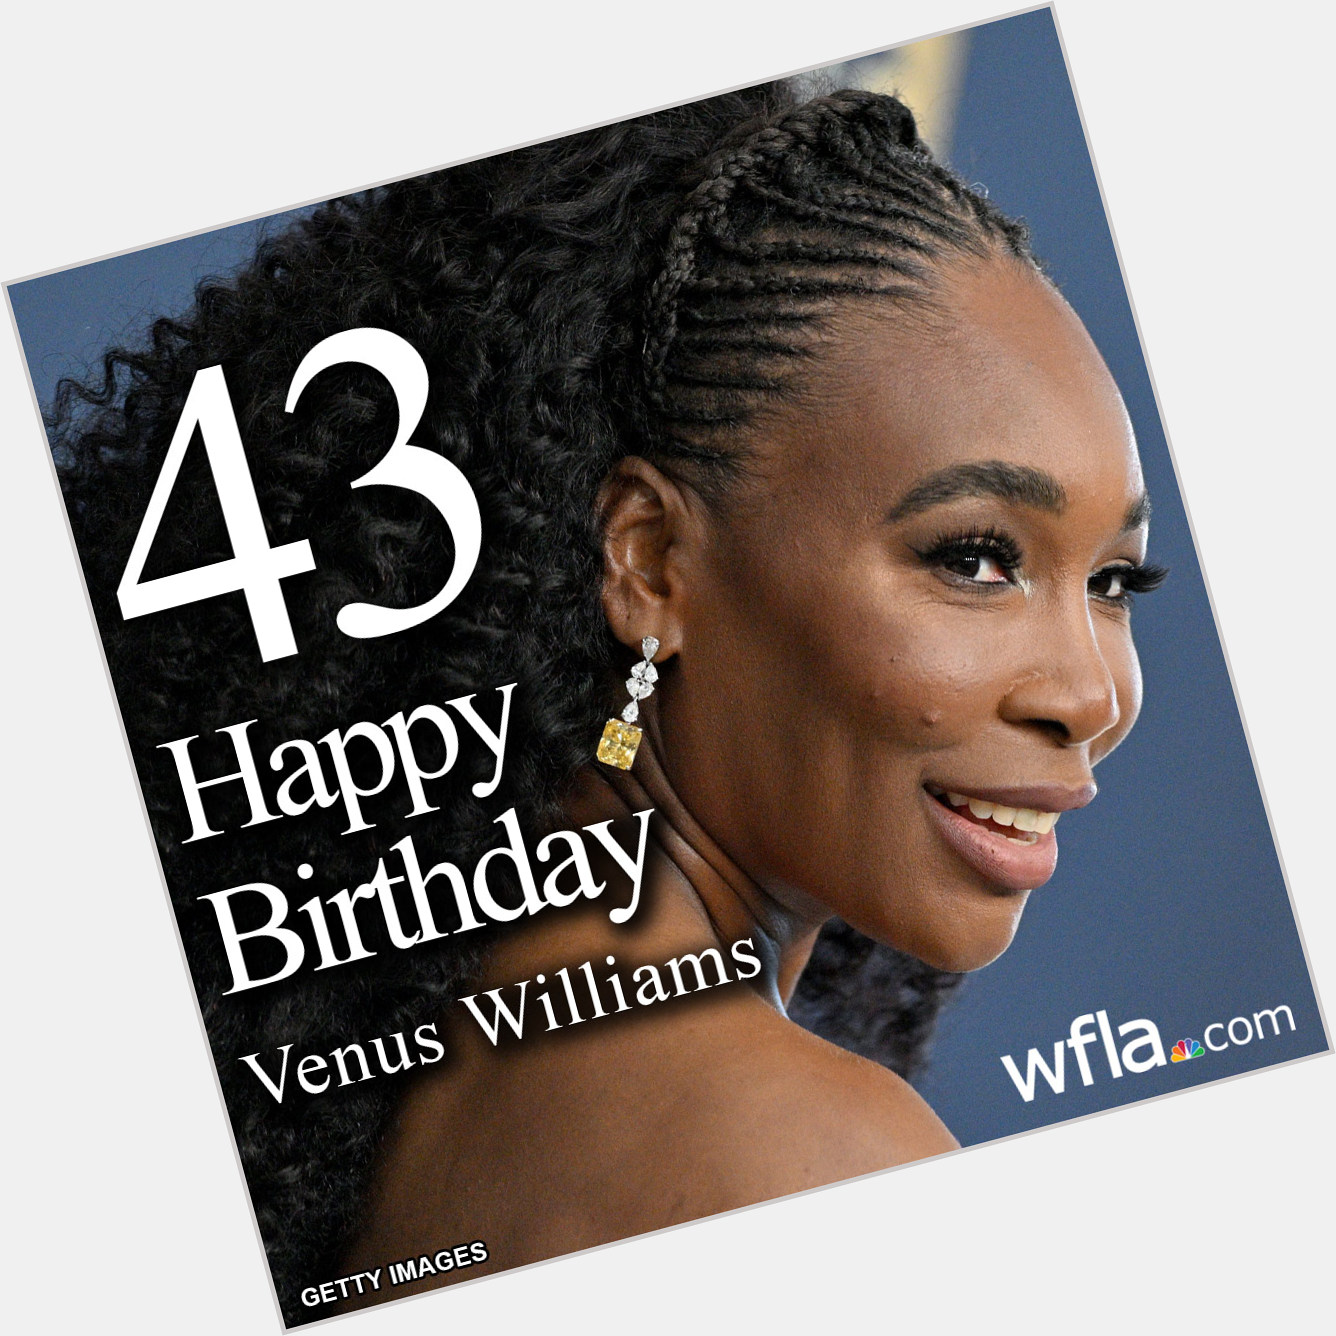 HAPPY BIRTHDAY, VENUS WILLIAMS! The pro tennis player is turning 43 today!   